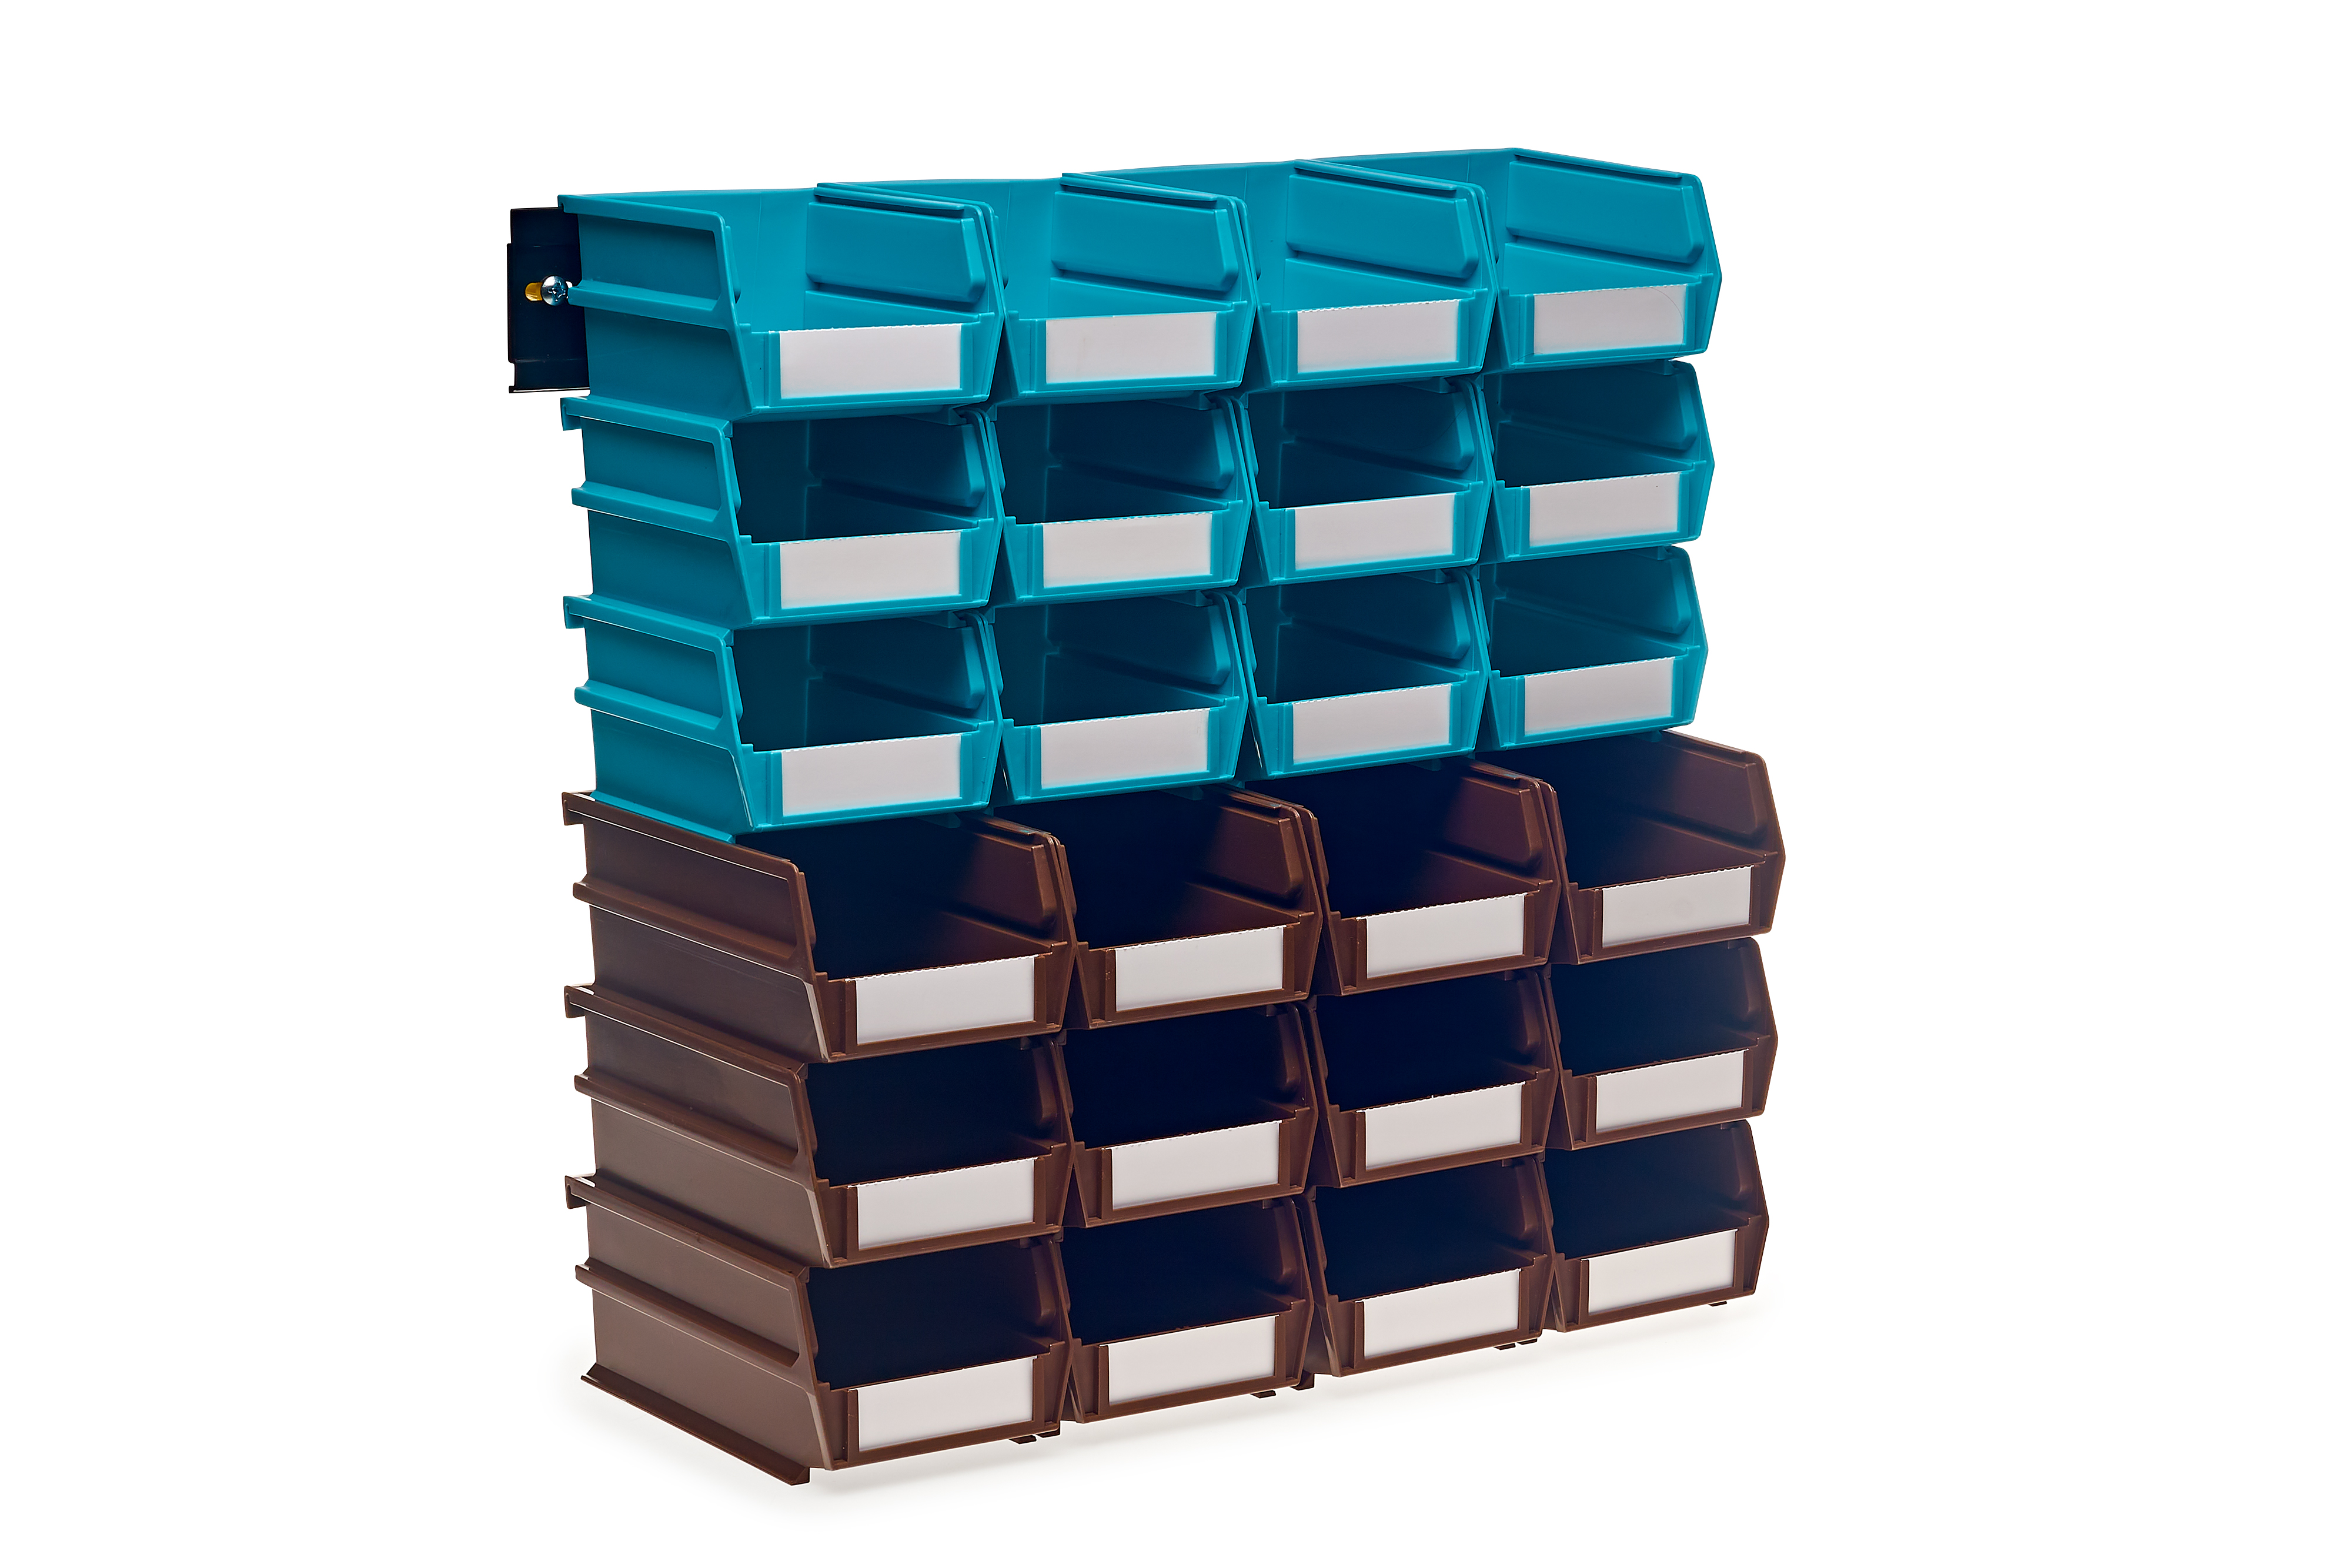 Triton Products® 26 Pc Wall Storage Unit with (12) 5-3/8L x 4-1/8W x 3H Teal Bins & (12) 7-3/8L x 4-1/8W x 3H Brown Bins, 24 CT, Wall Mount Rails 8-3/4L with Hardware, 2 Pk - image 1 of 7